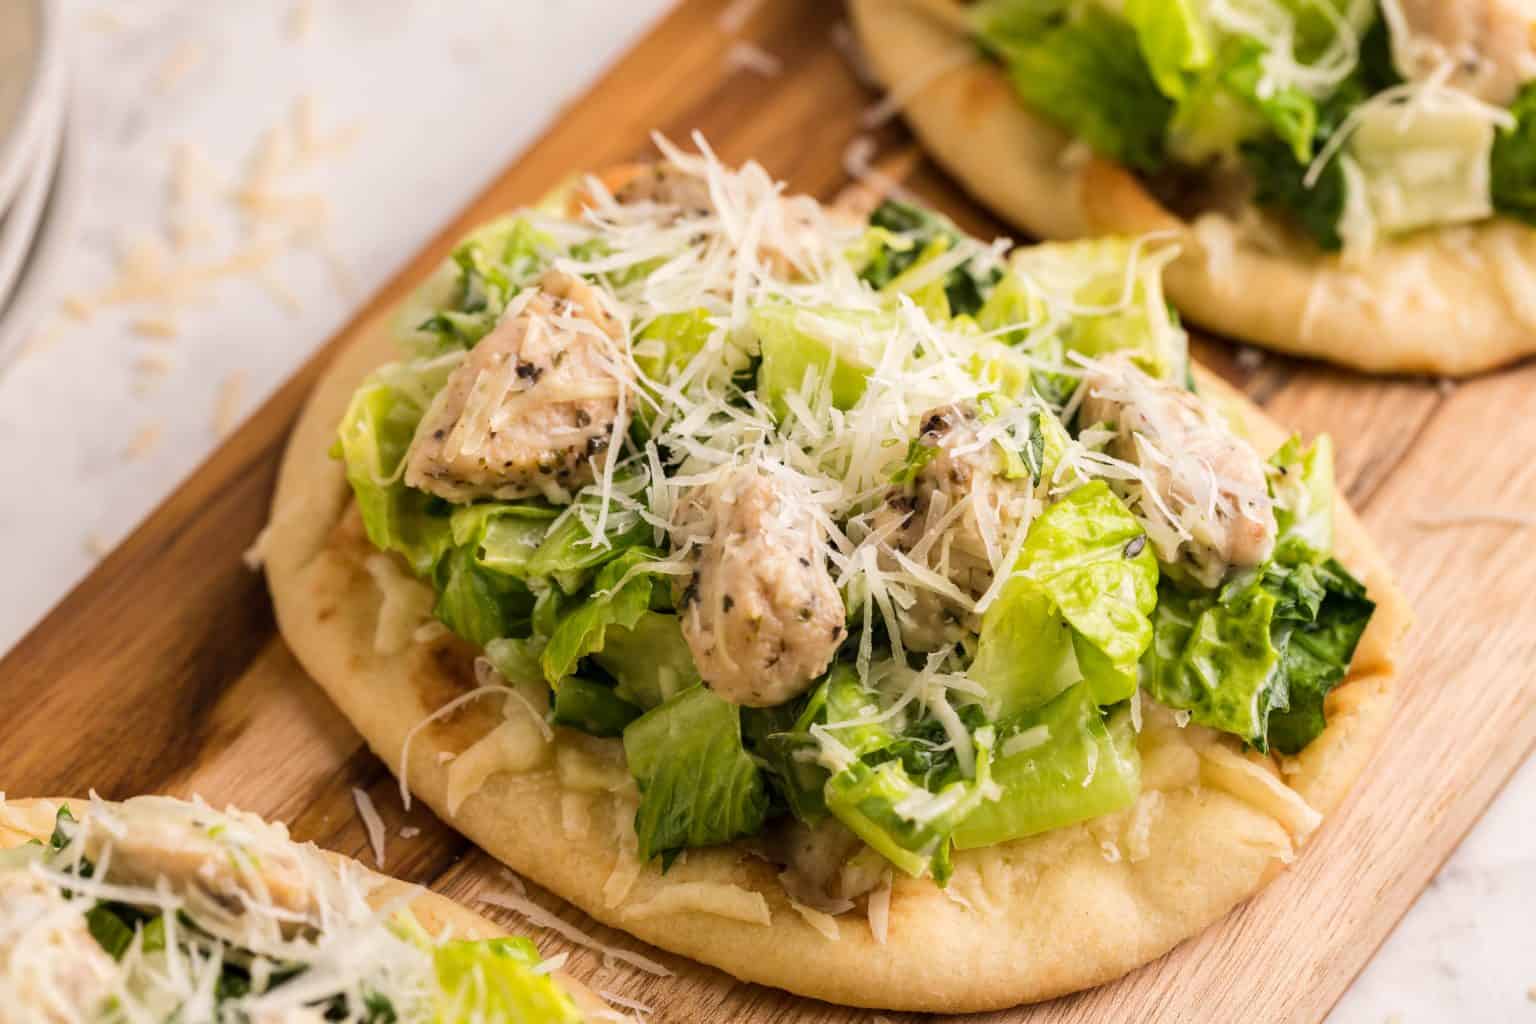 Small flatbread toped with salad and chicken.